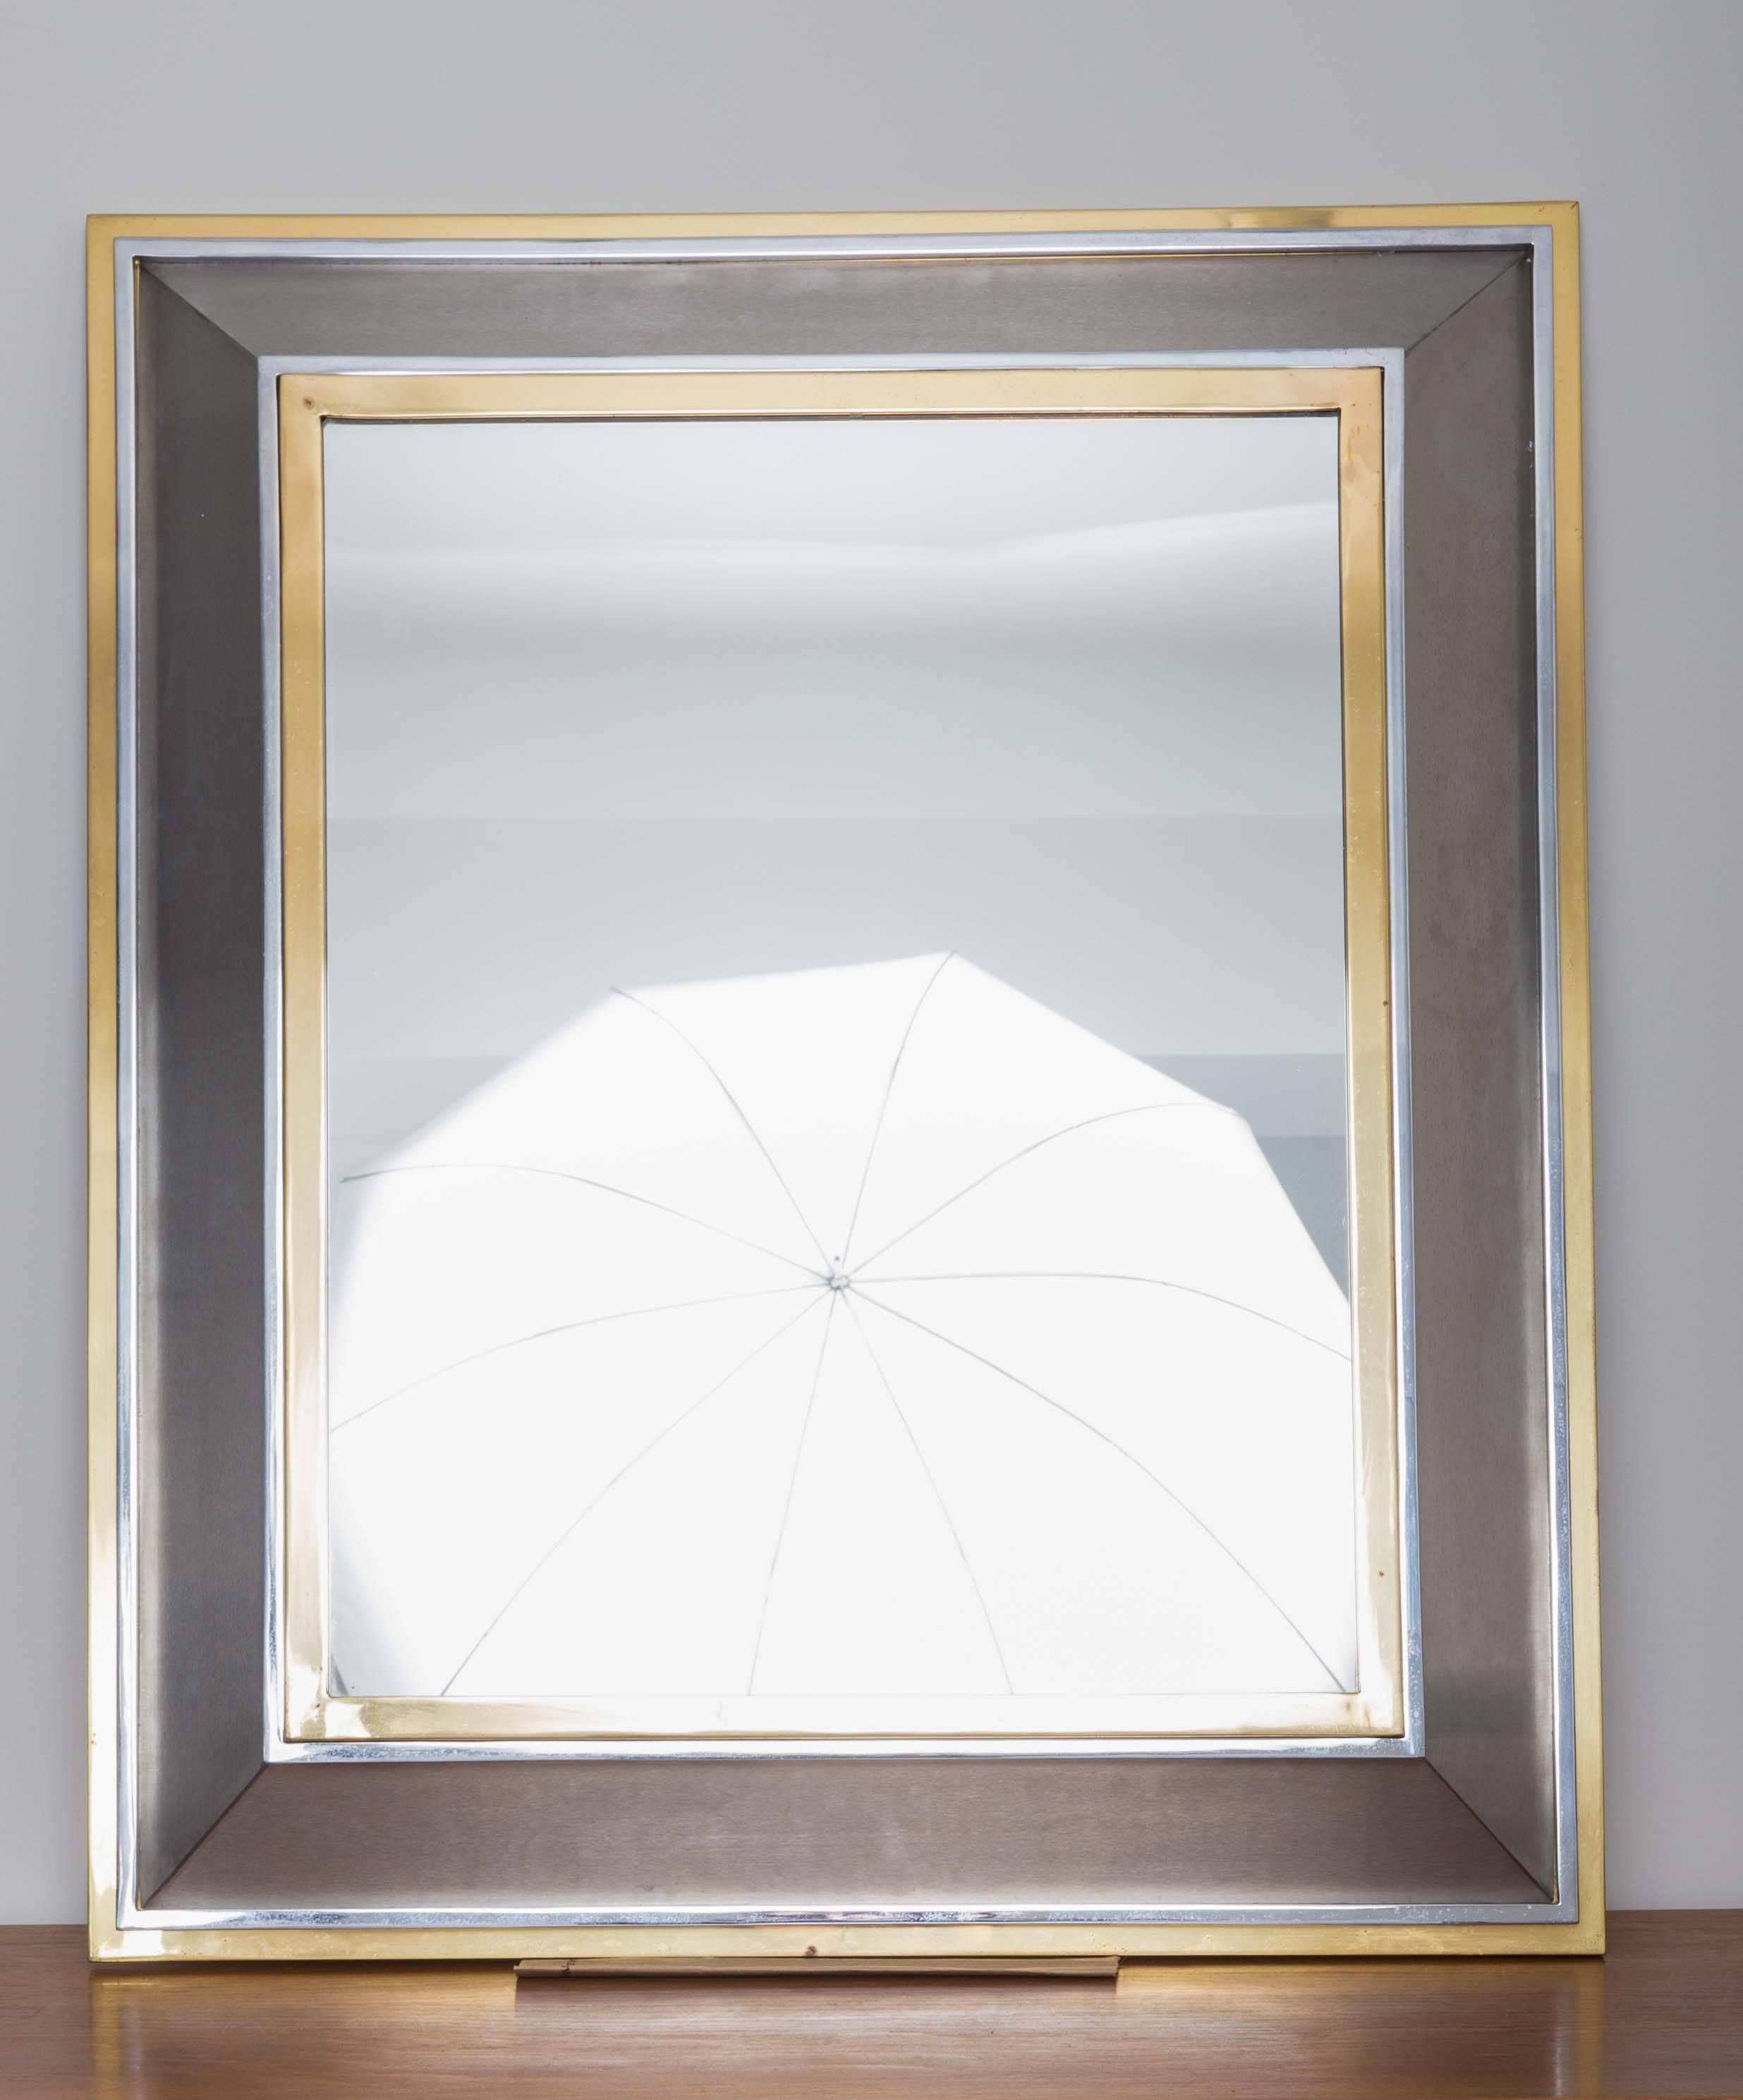 French mirror framed in metal and brass.
 